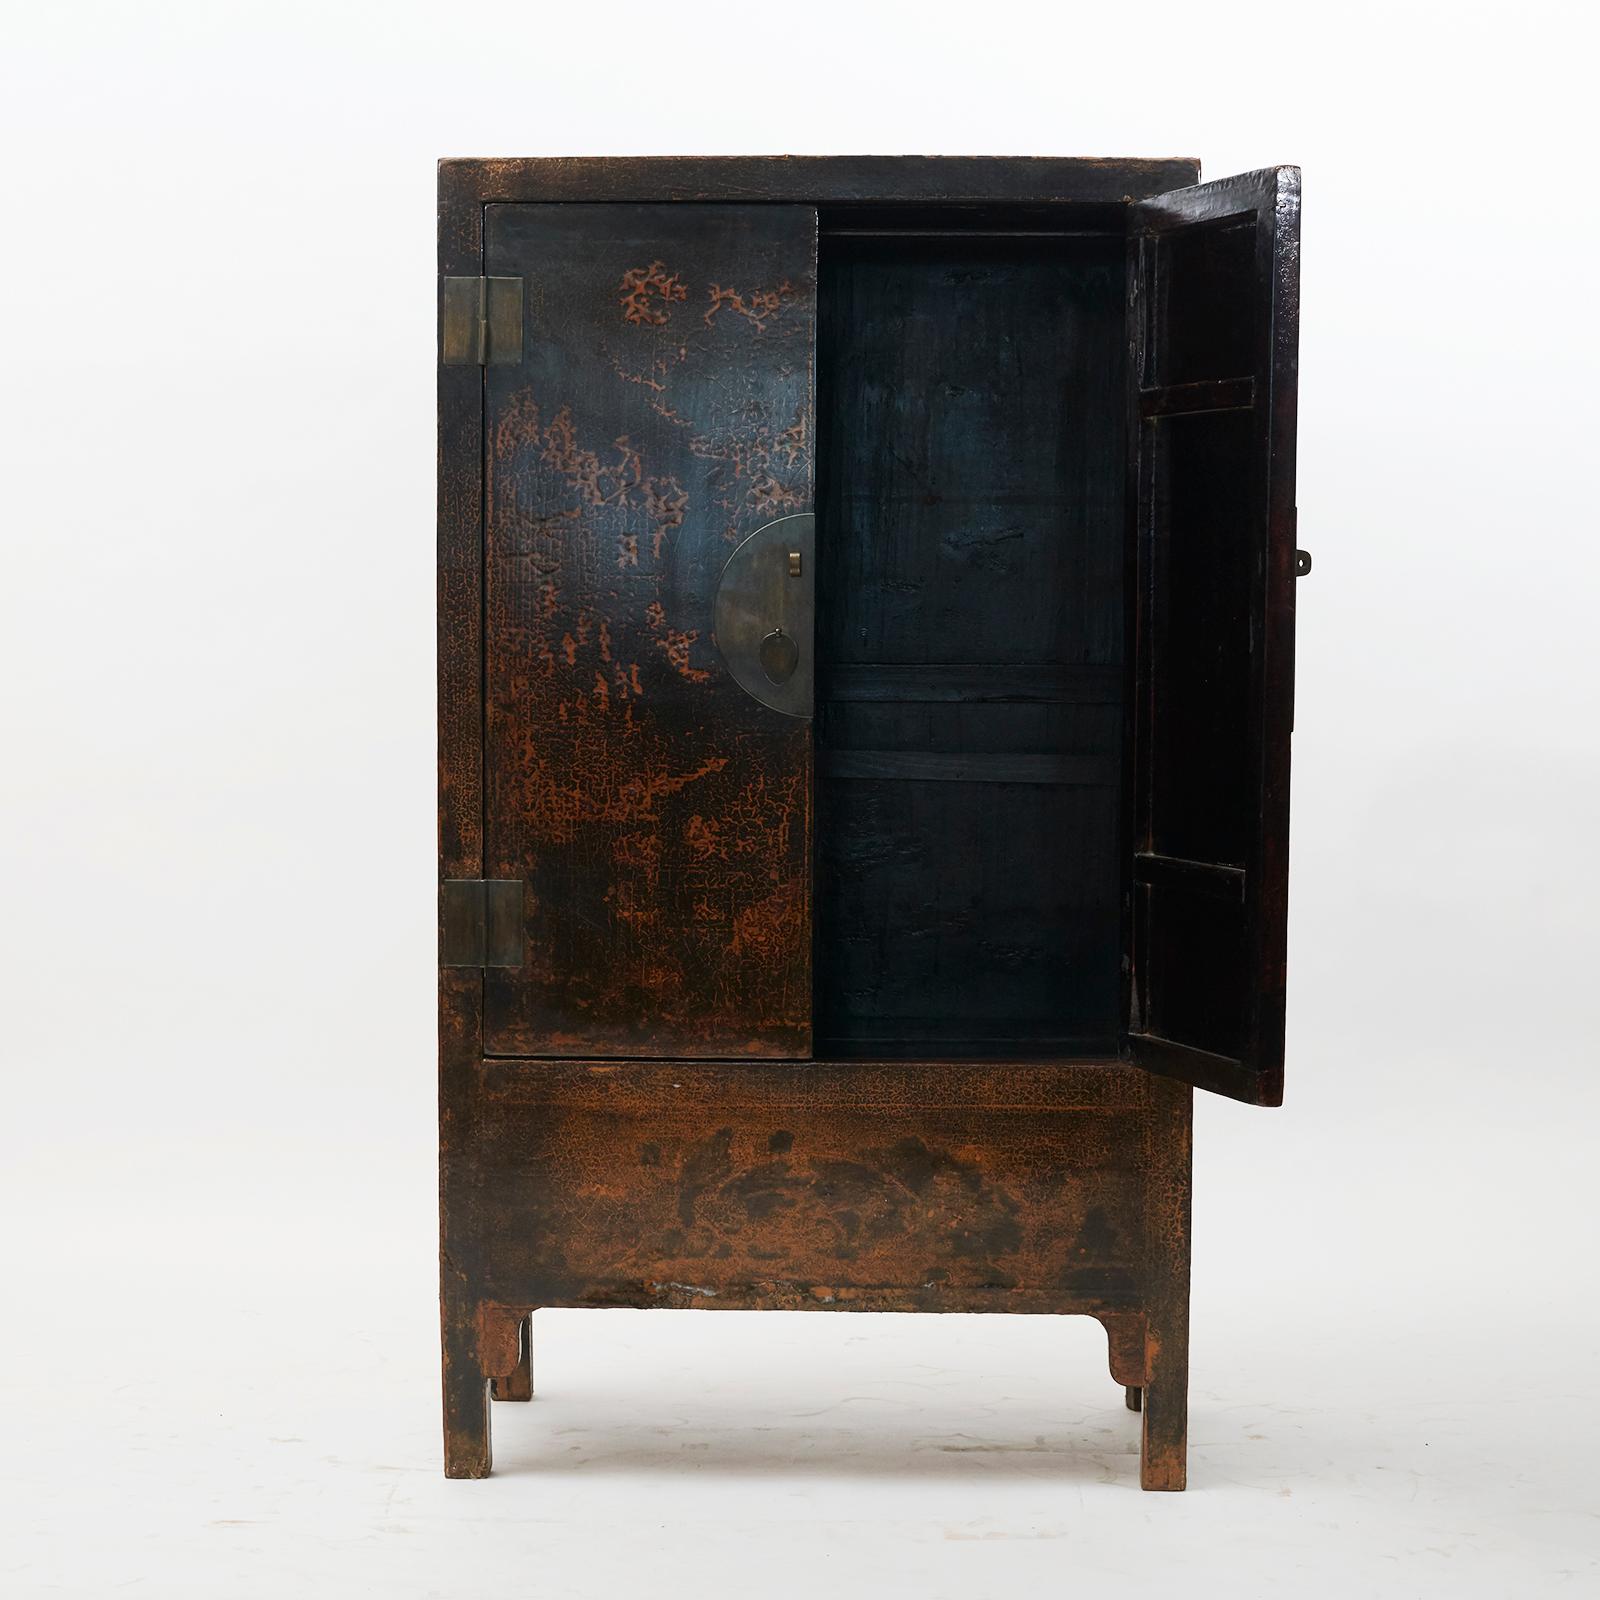 China cabinet, black lacquer, with stunning natural patina. The cabinet is from Shanxi Province from 1780-1820.